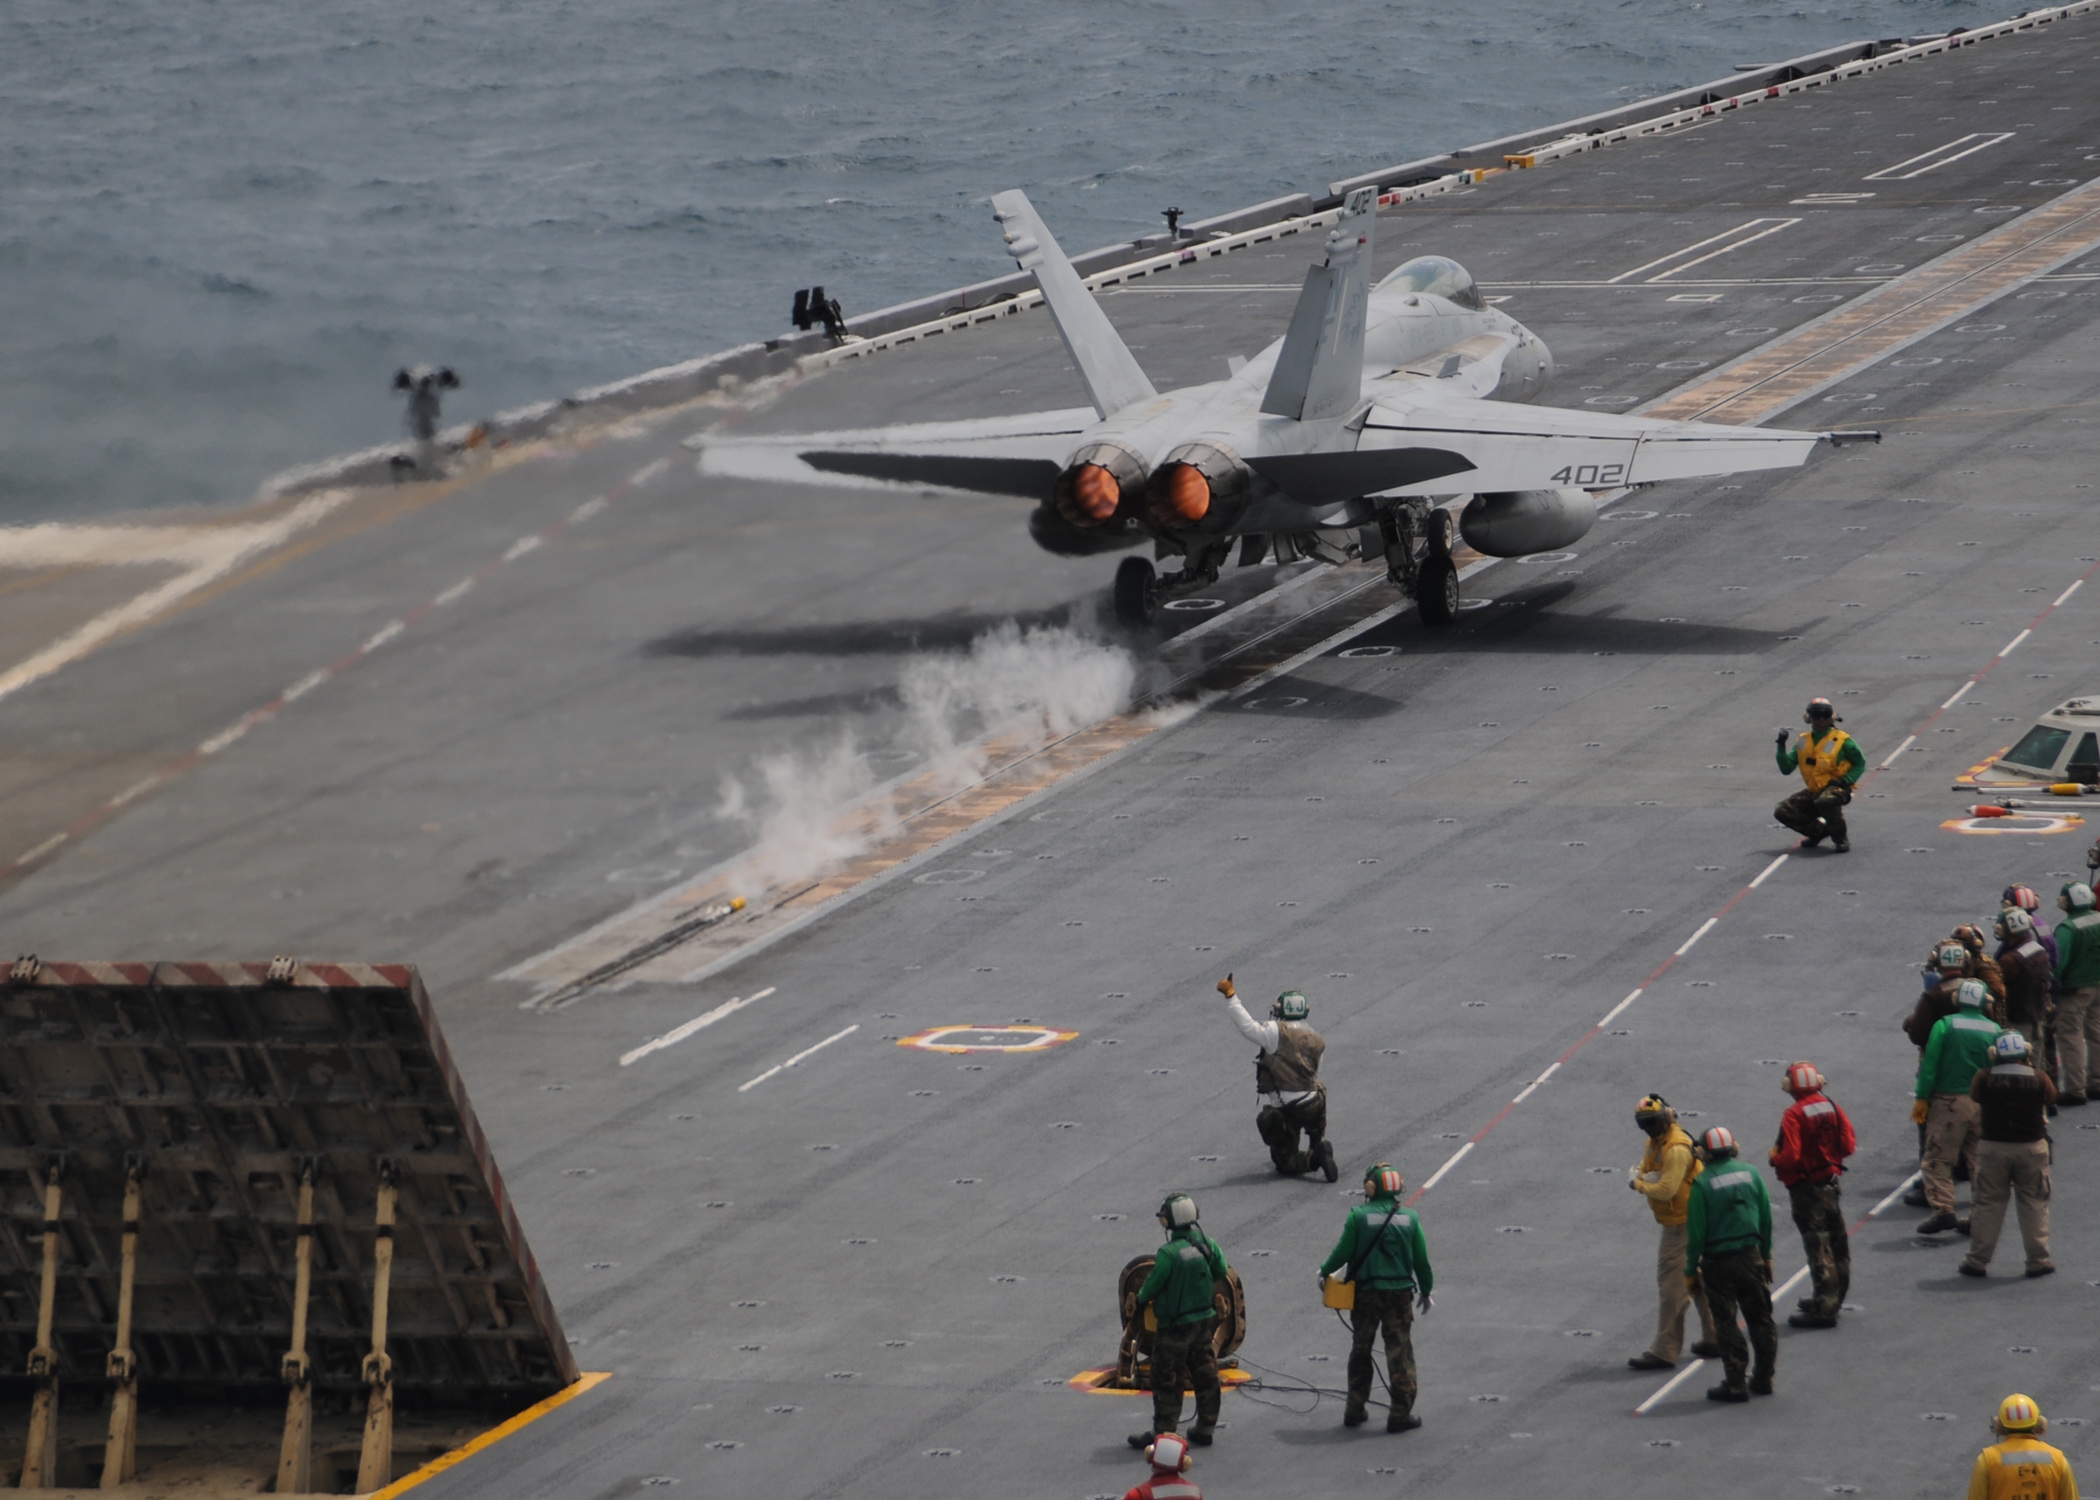 An F/A-18C Hornet from the Dambusters, Strike Fire Squadron (VFA-195) launches off the flight deck aboard USS George Washington (CVN 73) .  